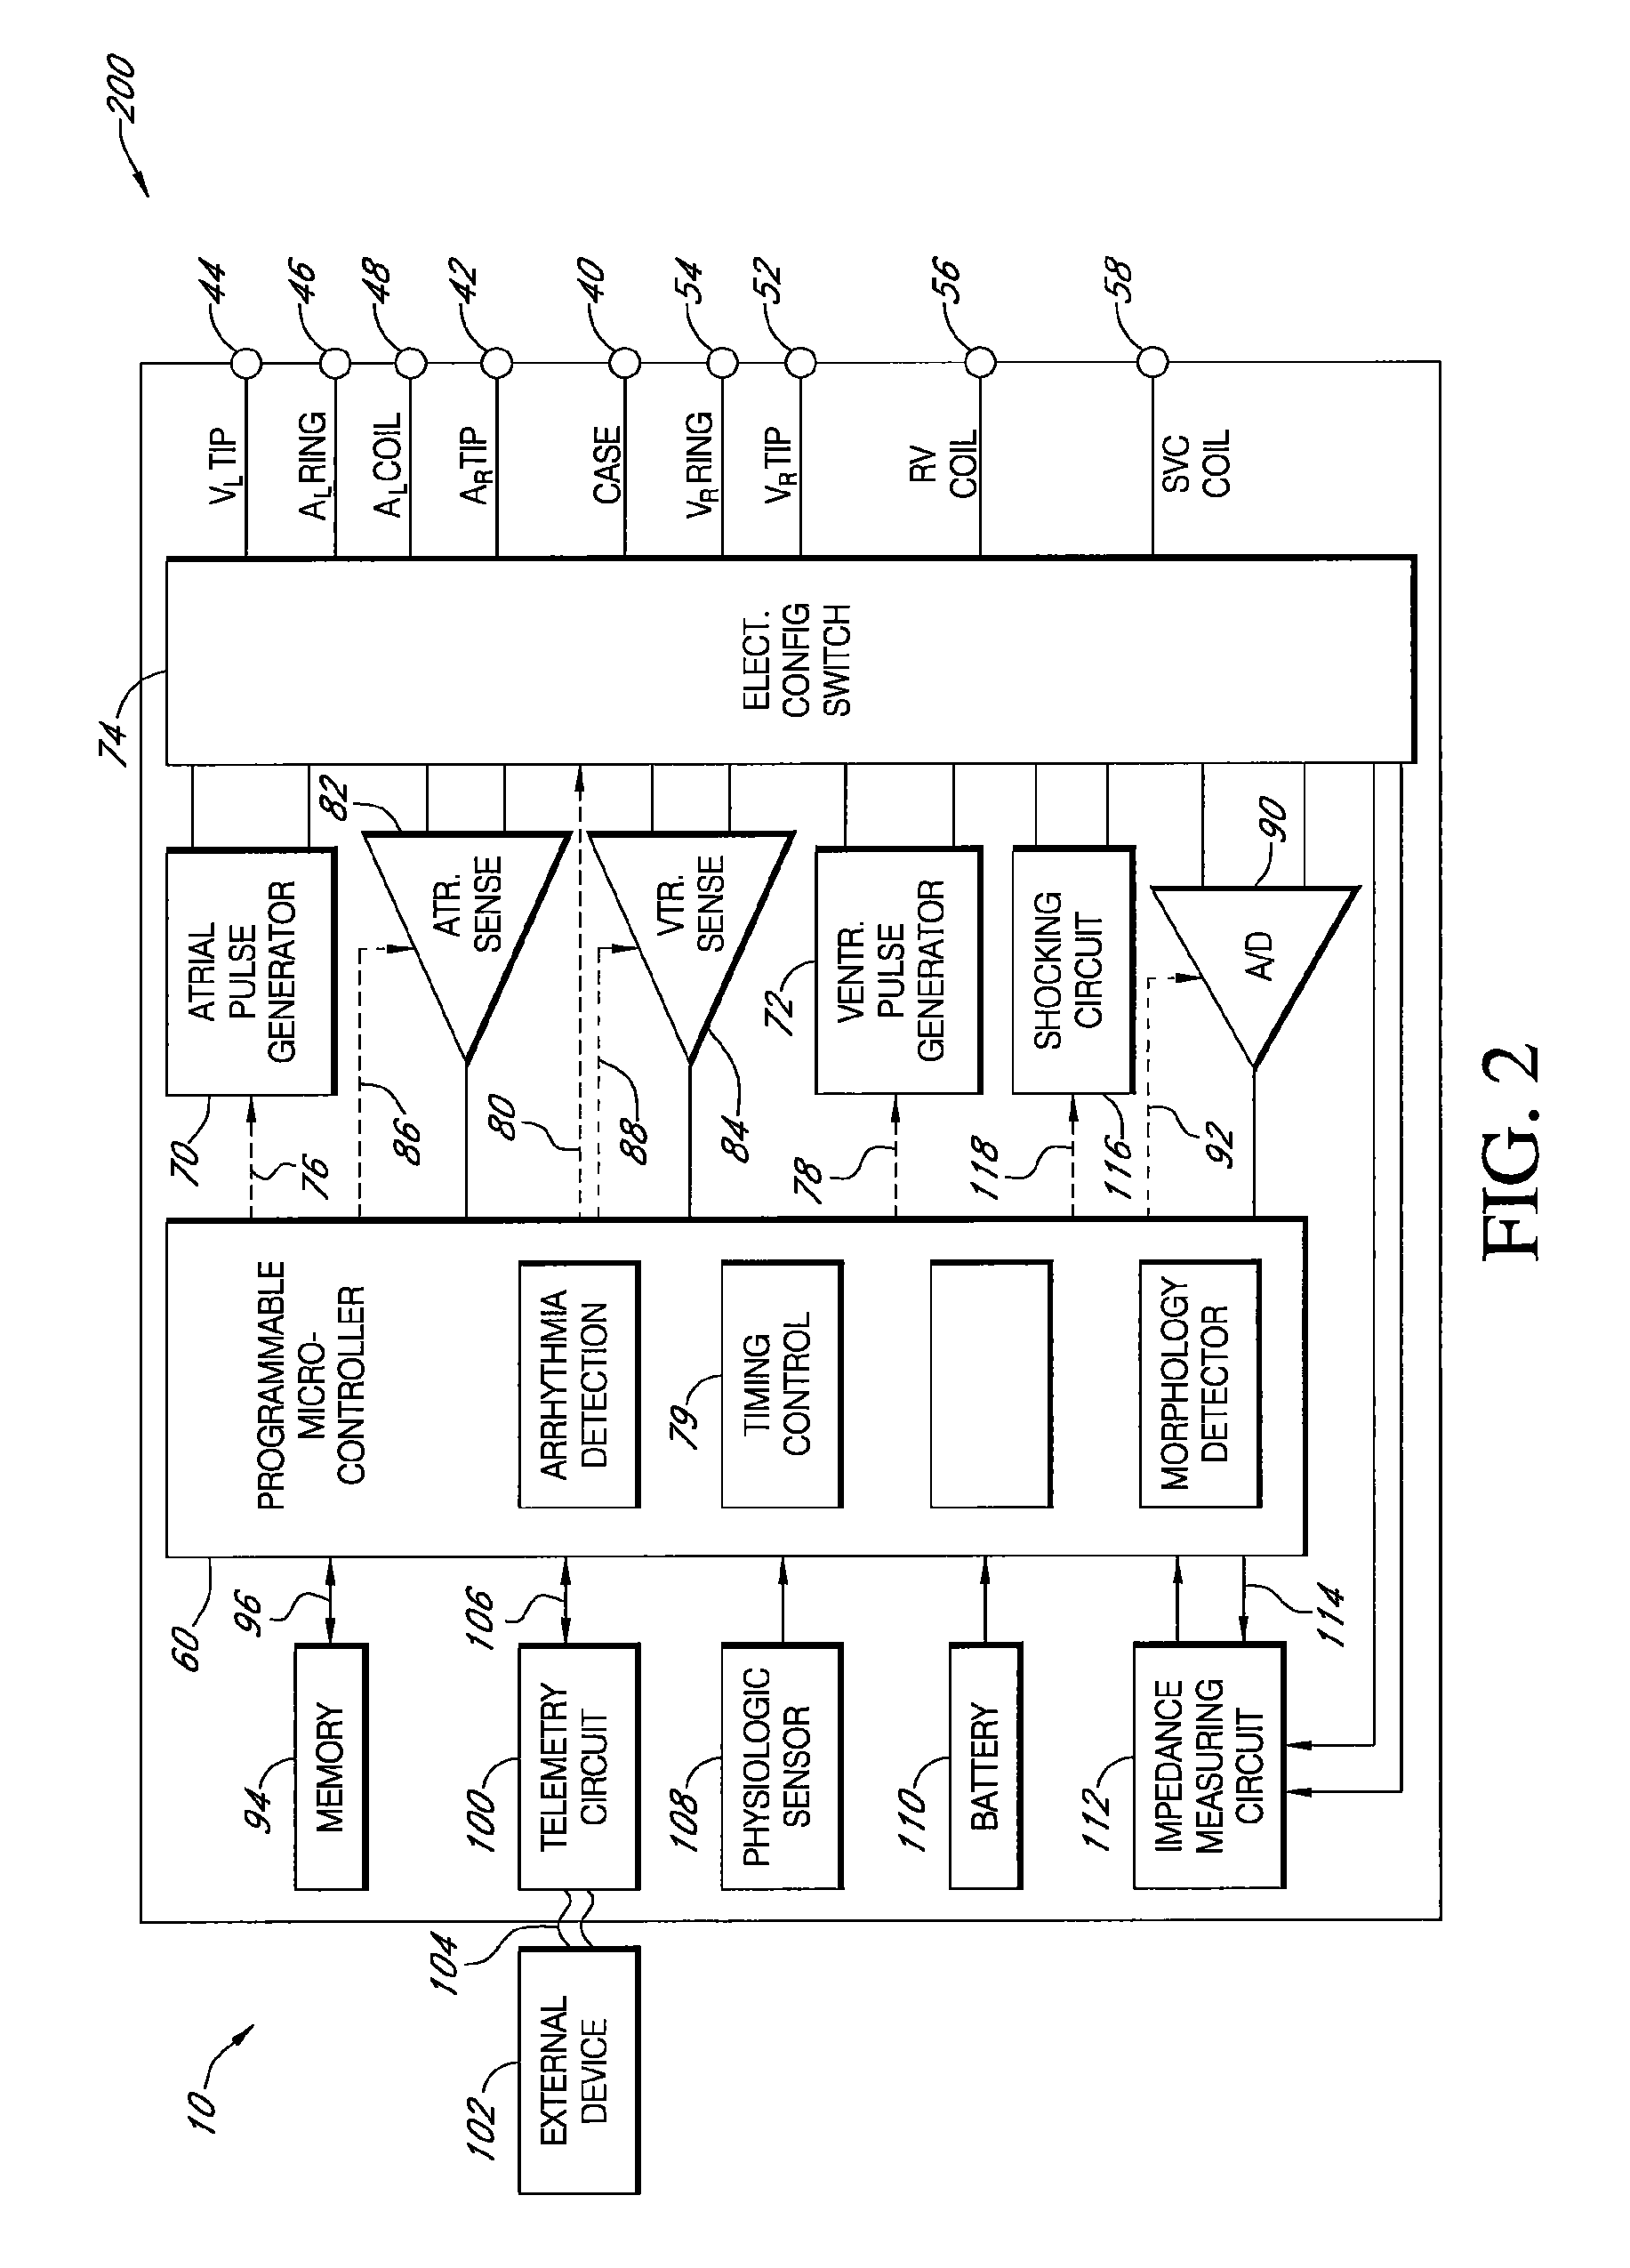 Closed loop programming for individual adjustment of electro-mechanical synchrony